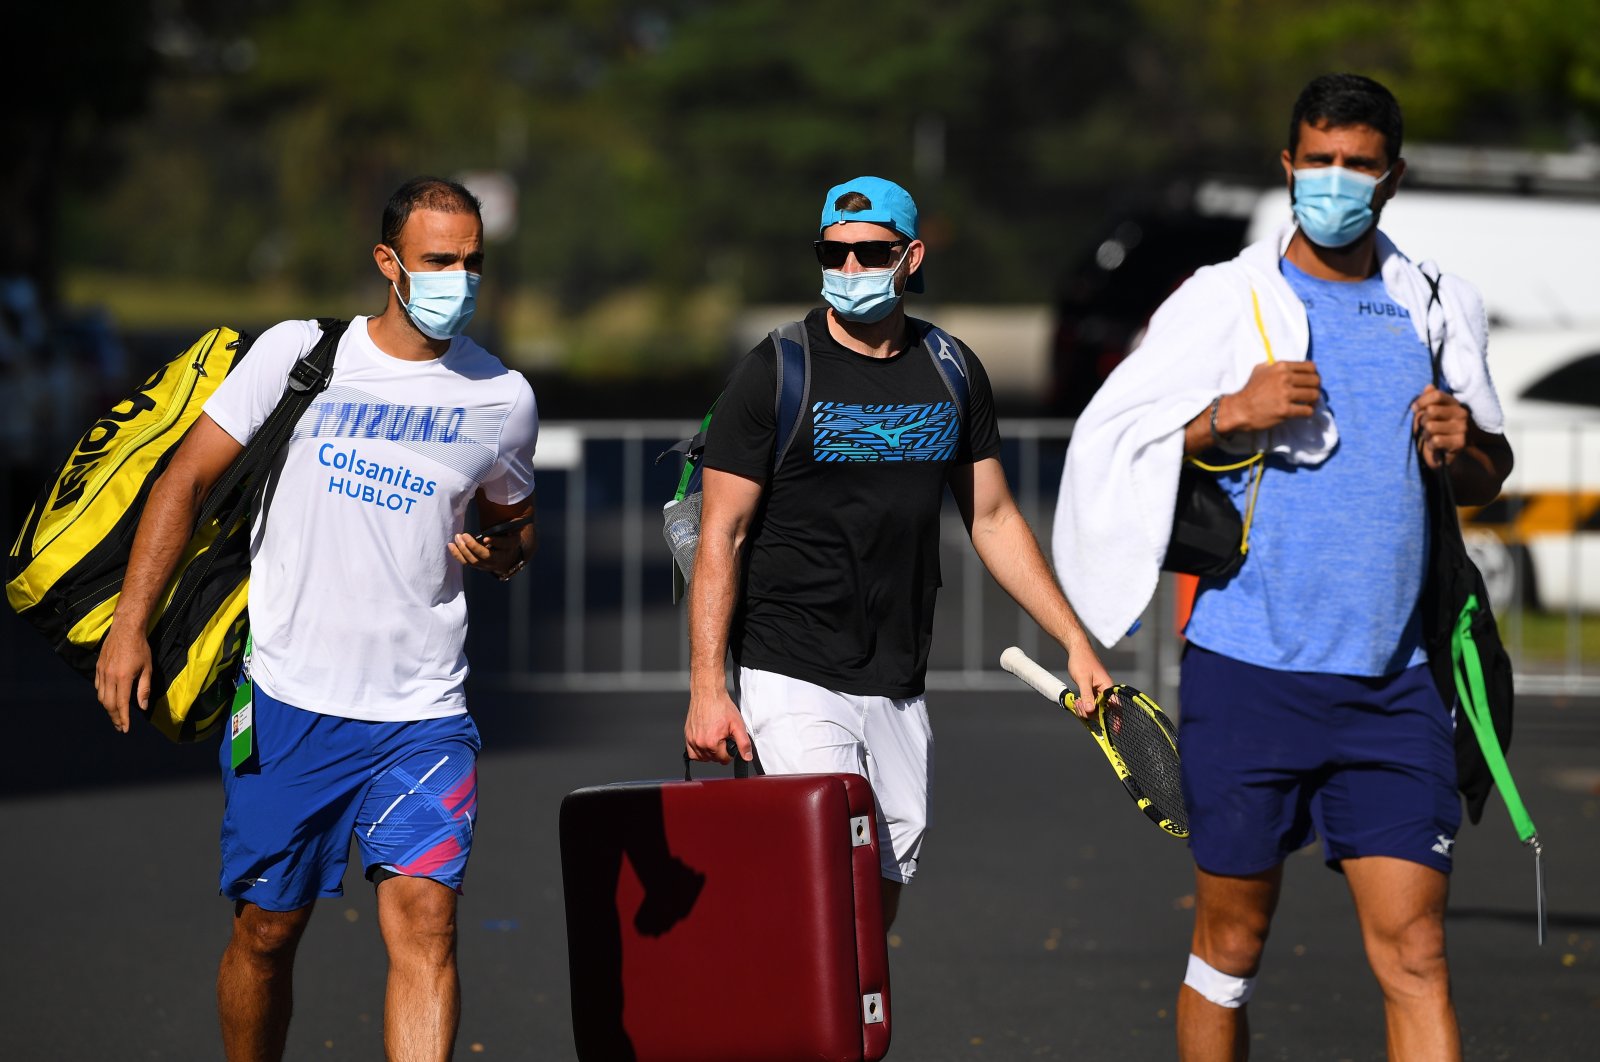 Columbian tennis player Juan Sebastian Cabal (L) exits the Park View Hotel to attend a training session in Melbourne, Australia, Jan. 21, 2021. (EPA Photo)